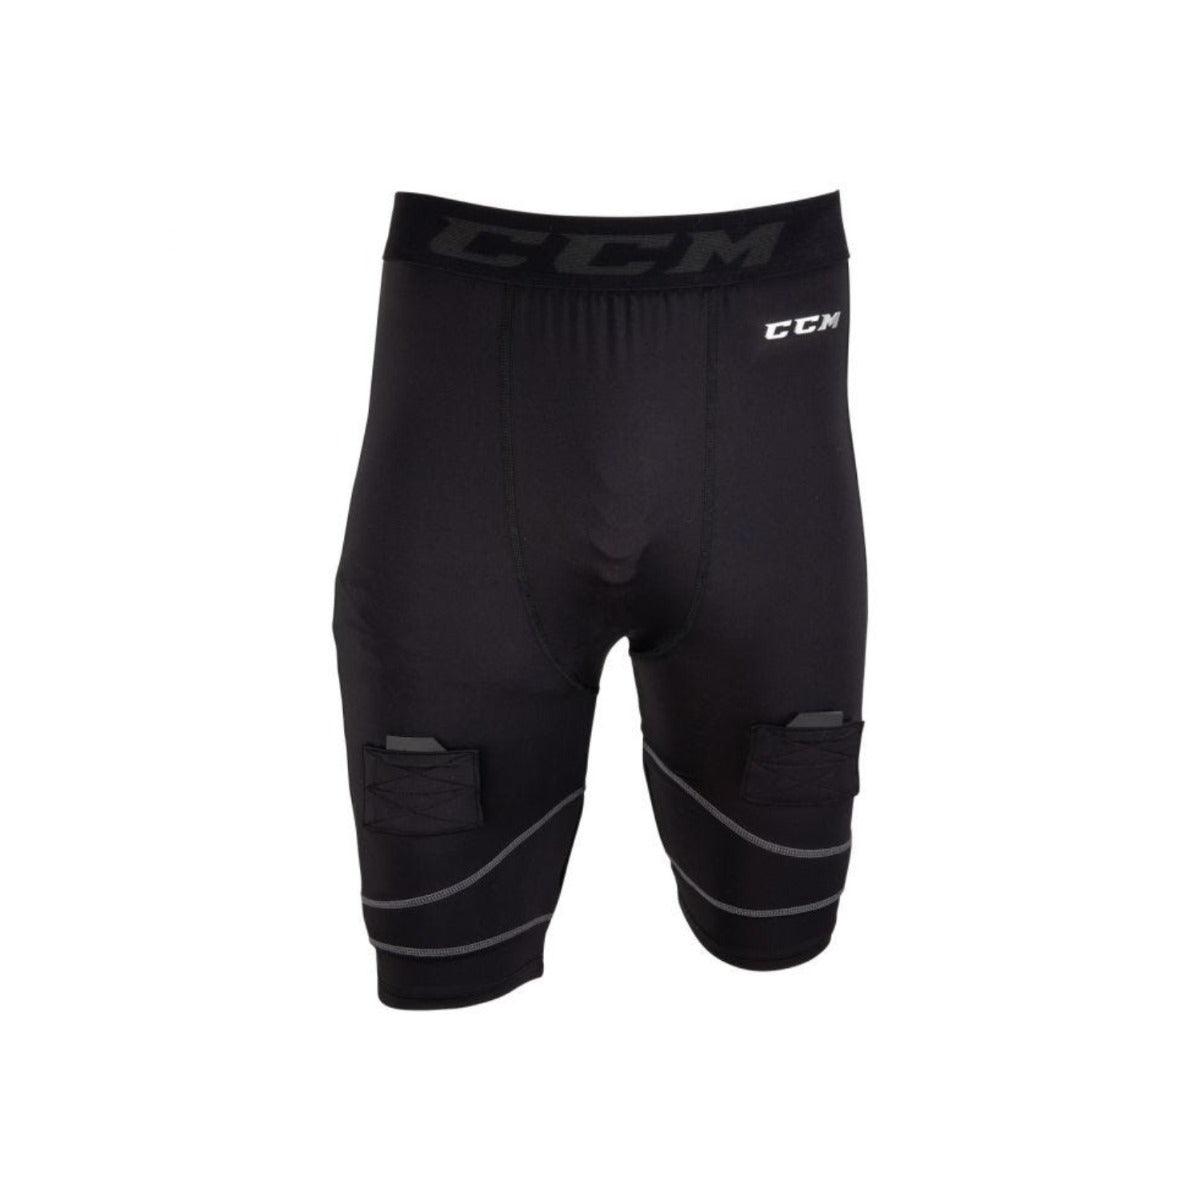 Men Compression Pro Short with Jock/Tabs - Sports Excellence